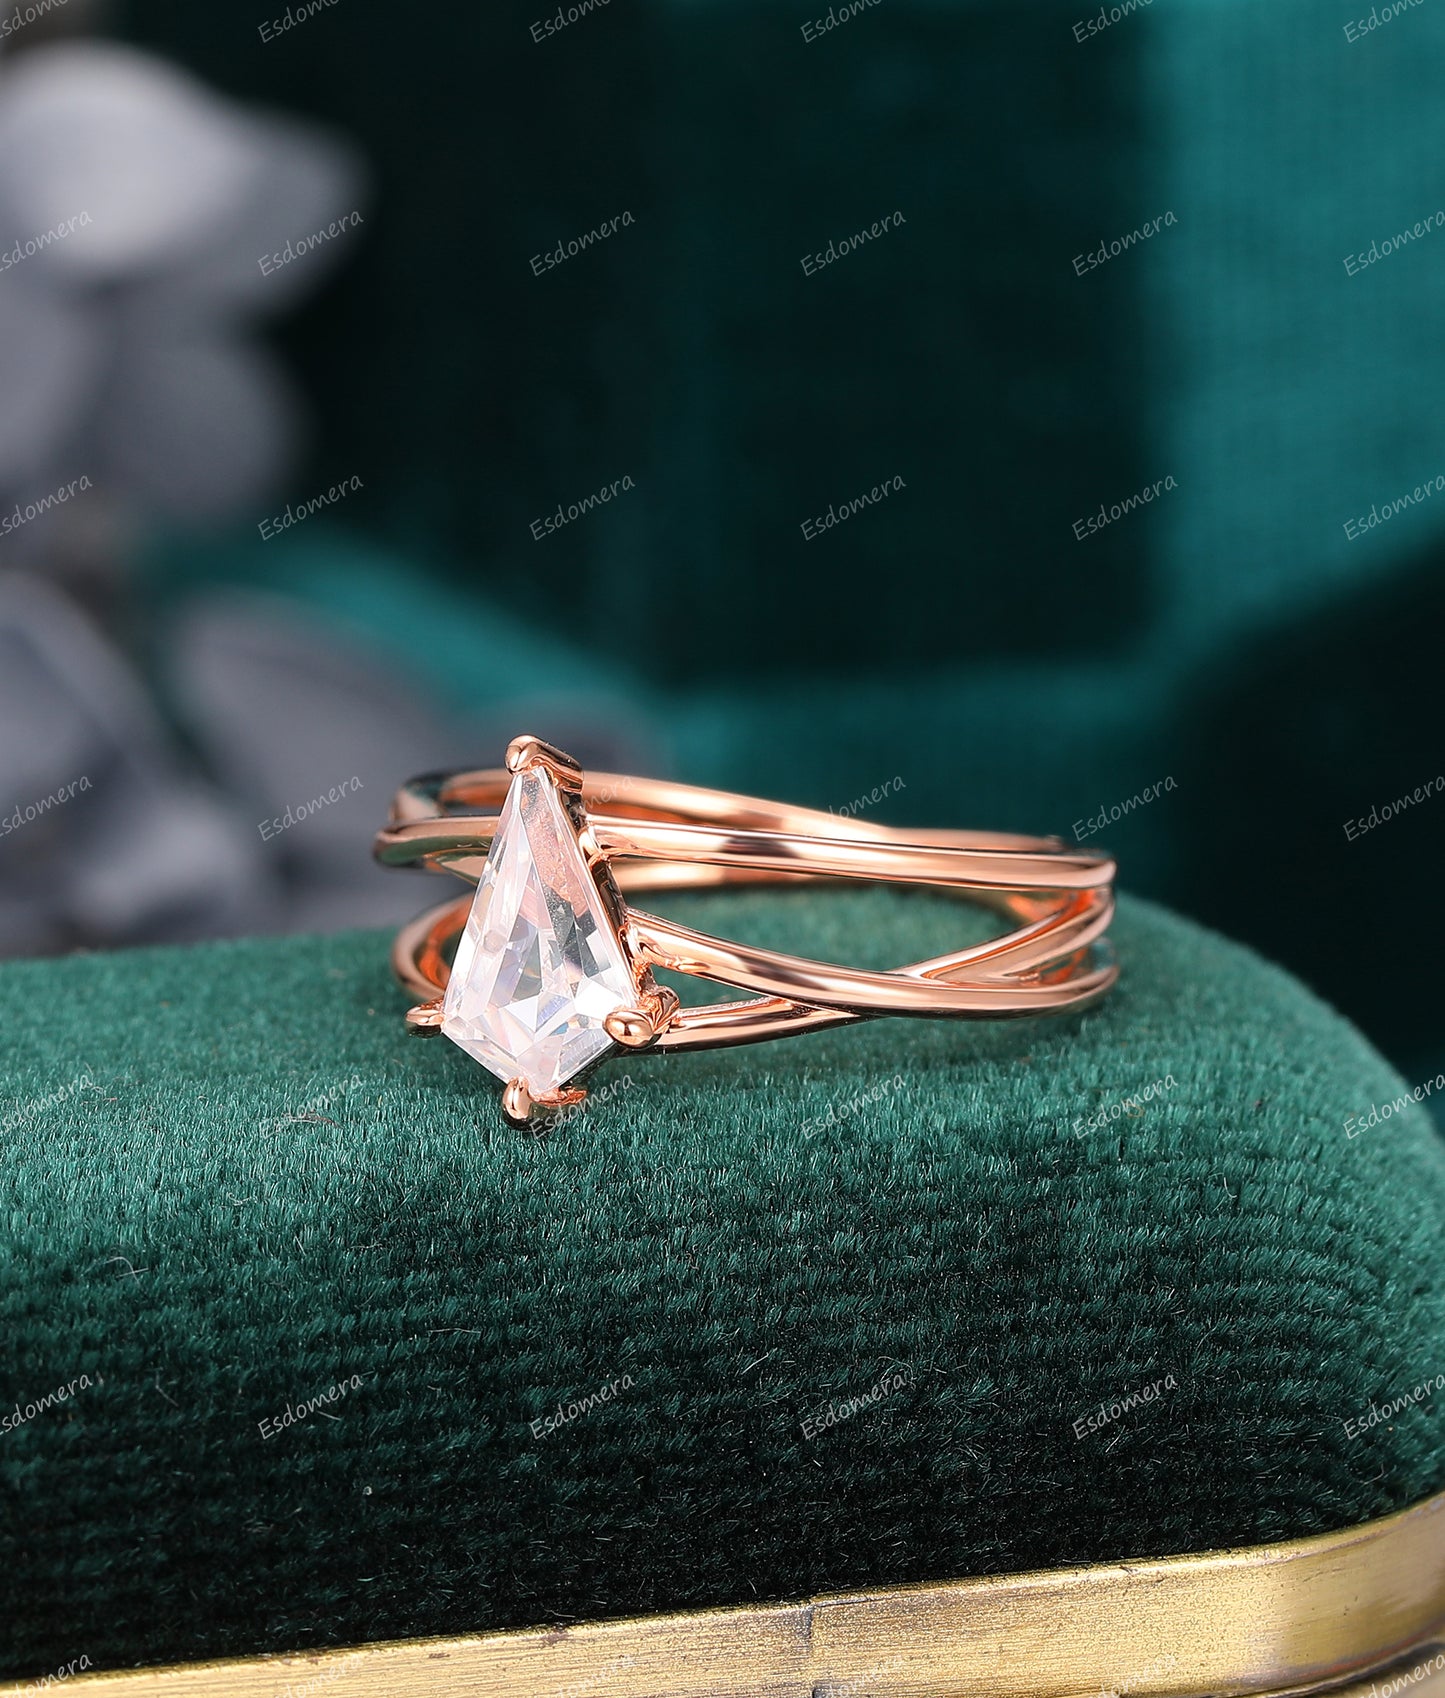 Art Deco 1.35CT Kite Cut Moissanite Ring, 14k Rose Gold Solitaire Ring, Unique Anniversary Gift For Her